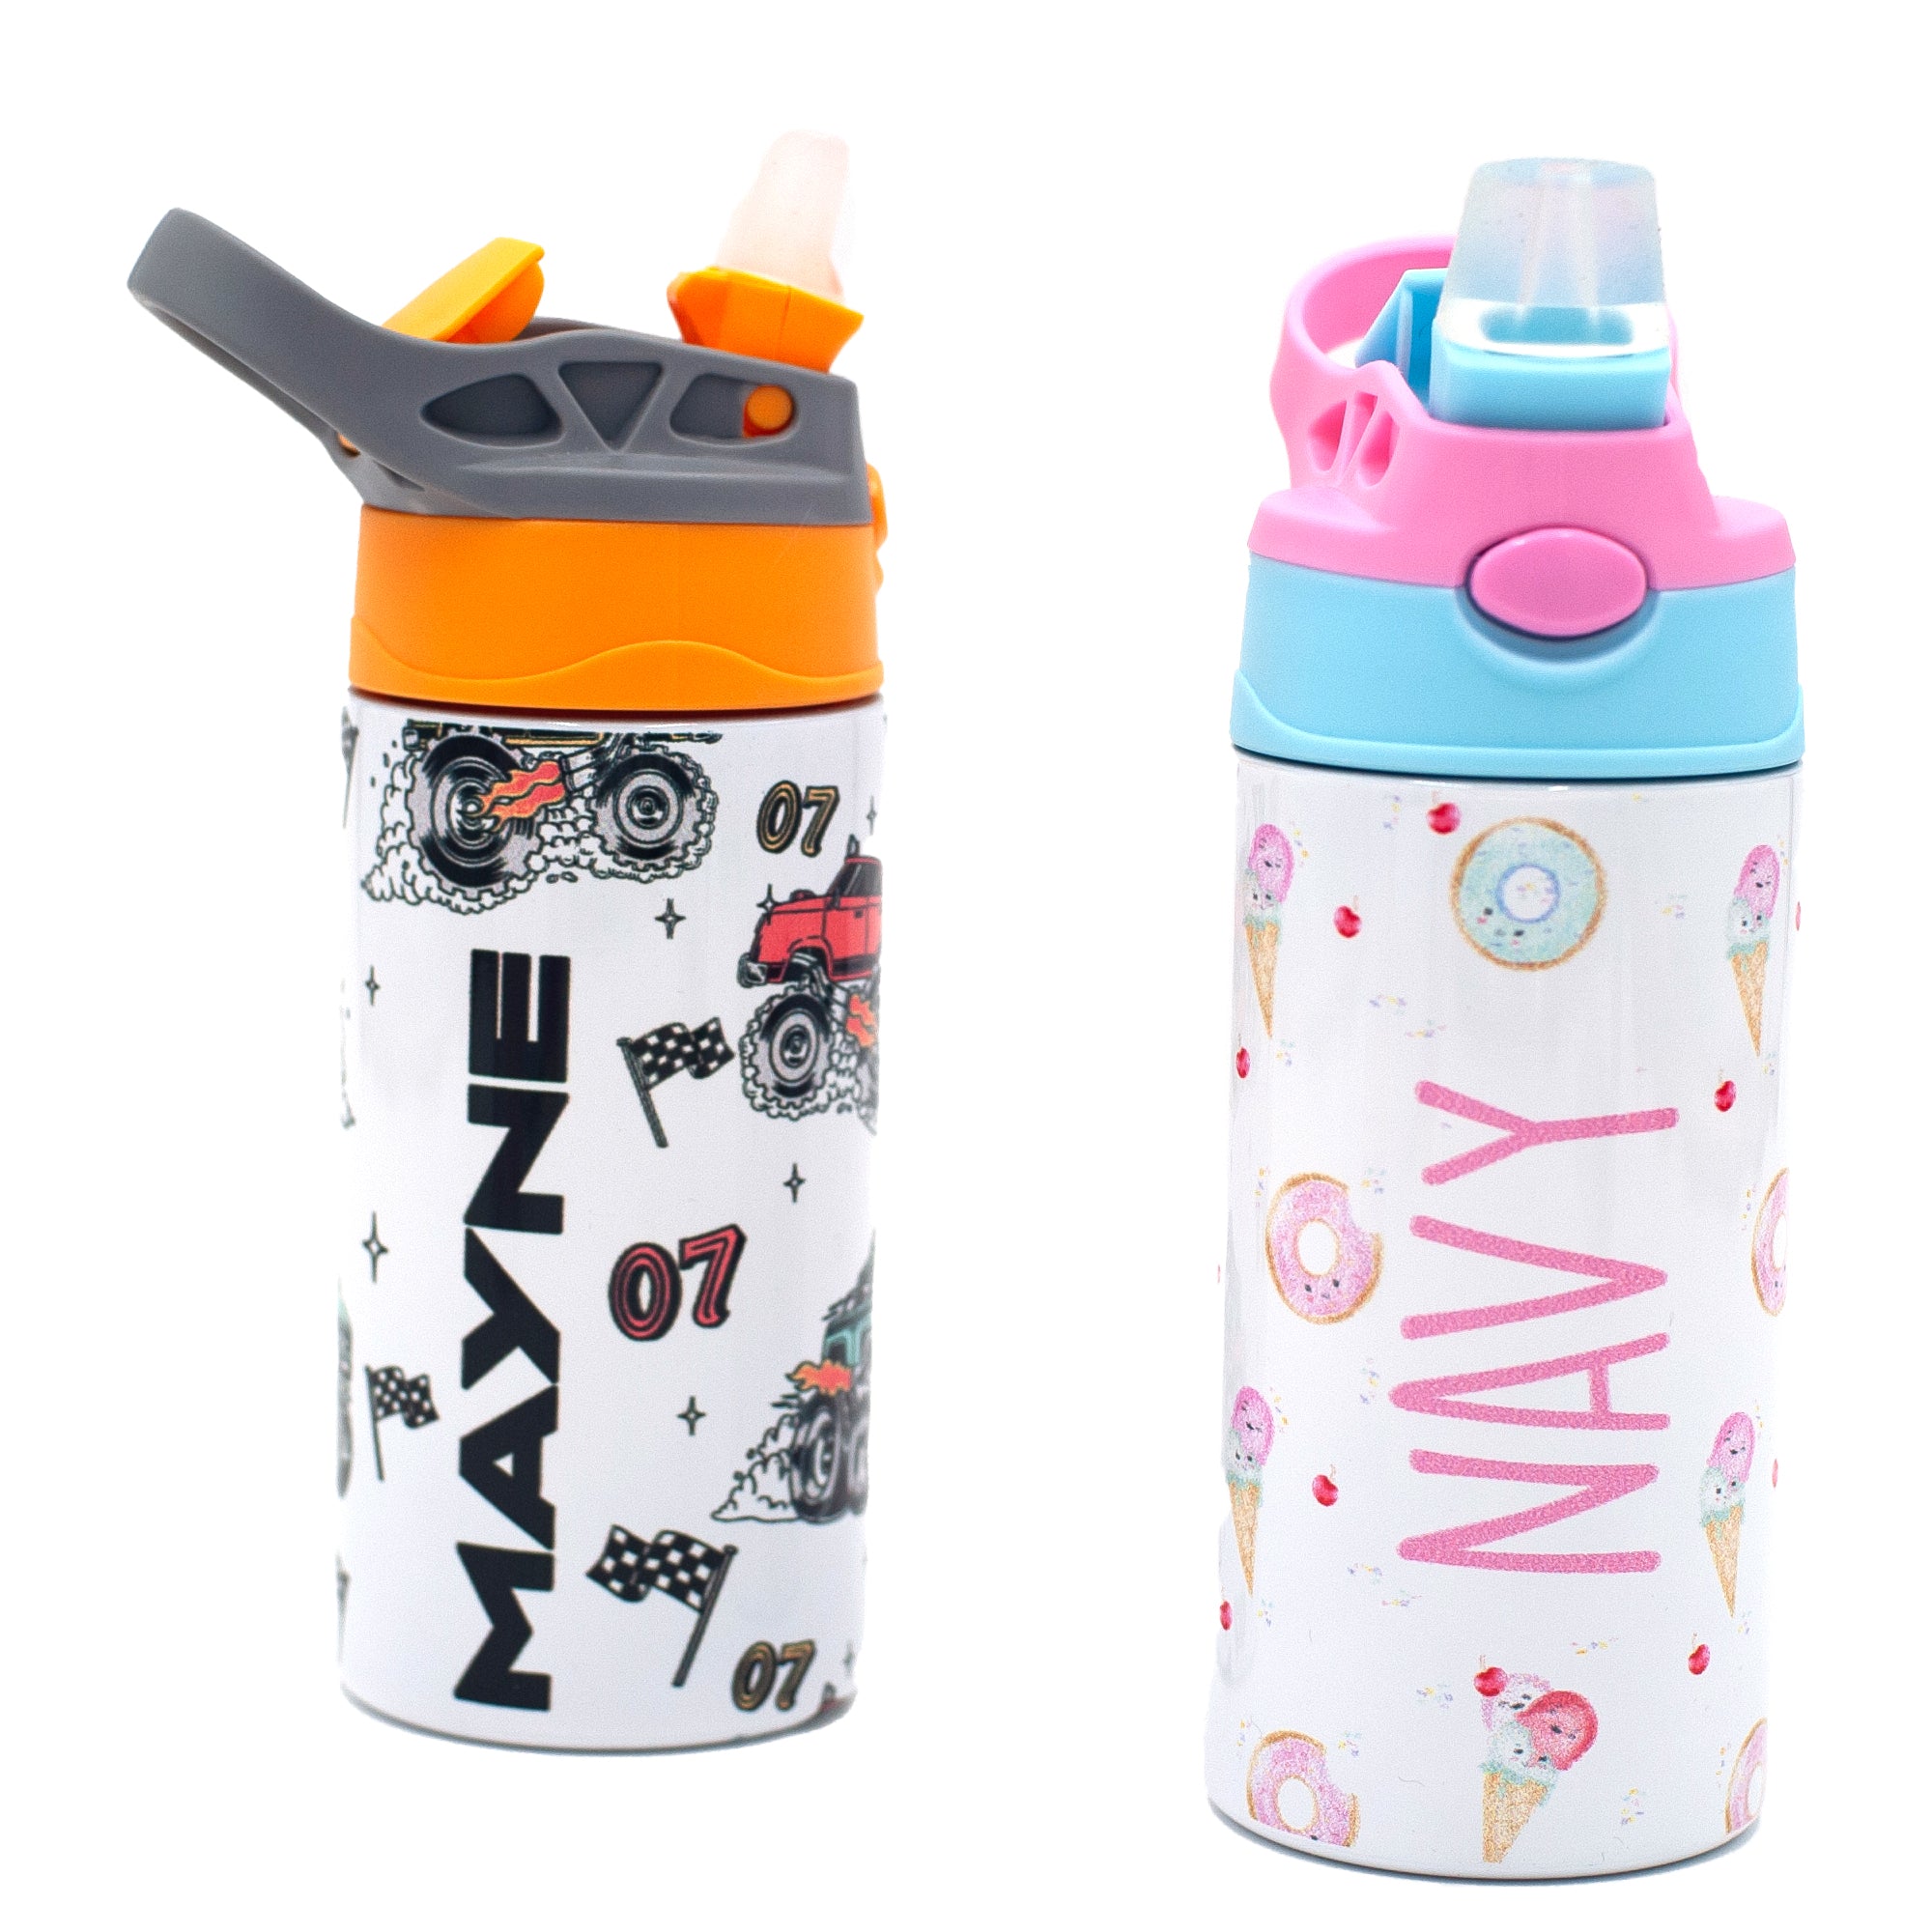 Kind Smart Loved - Personalized Kids Water Bottle With Straw Lid - callown